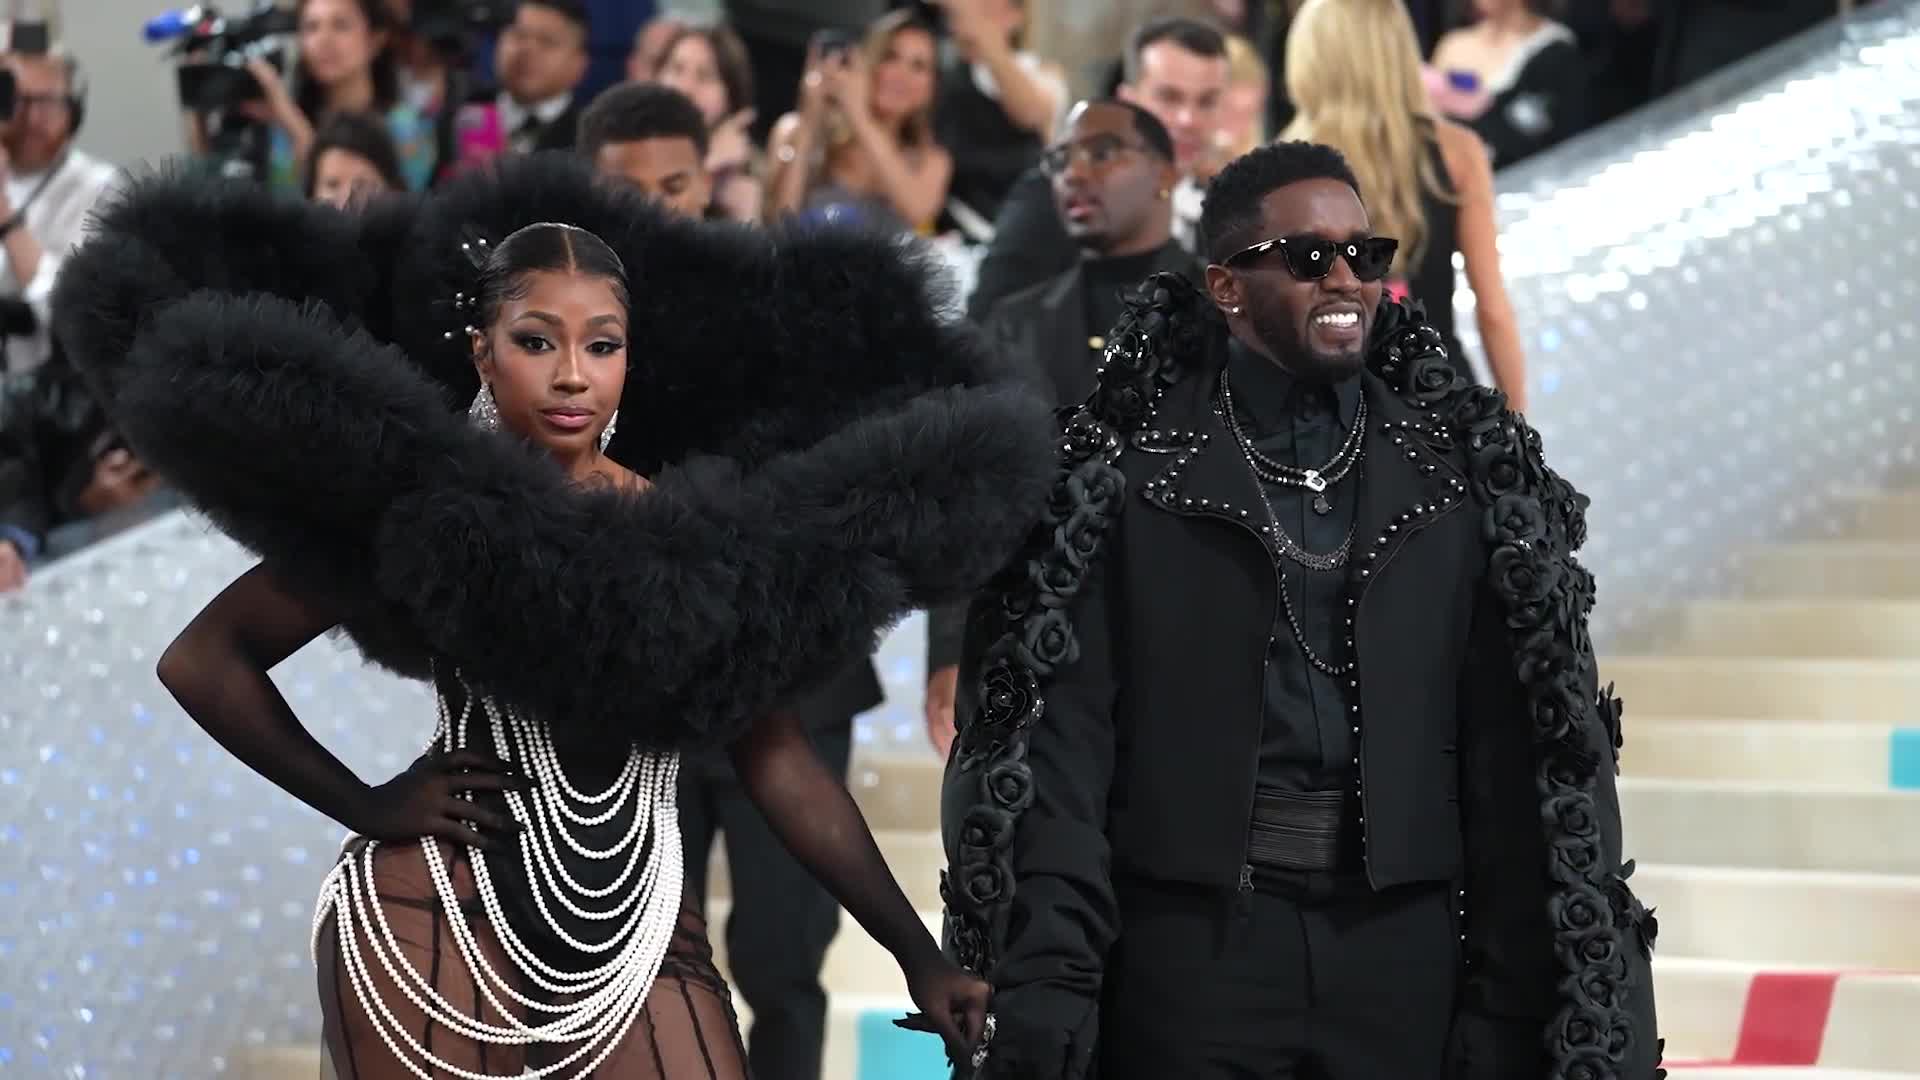 Watch Preparing for the Met Gala With Diddy and Yung Miami Getting